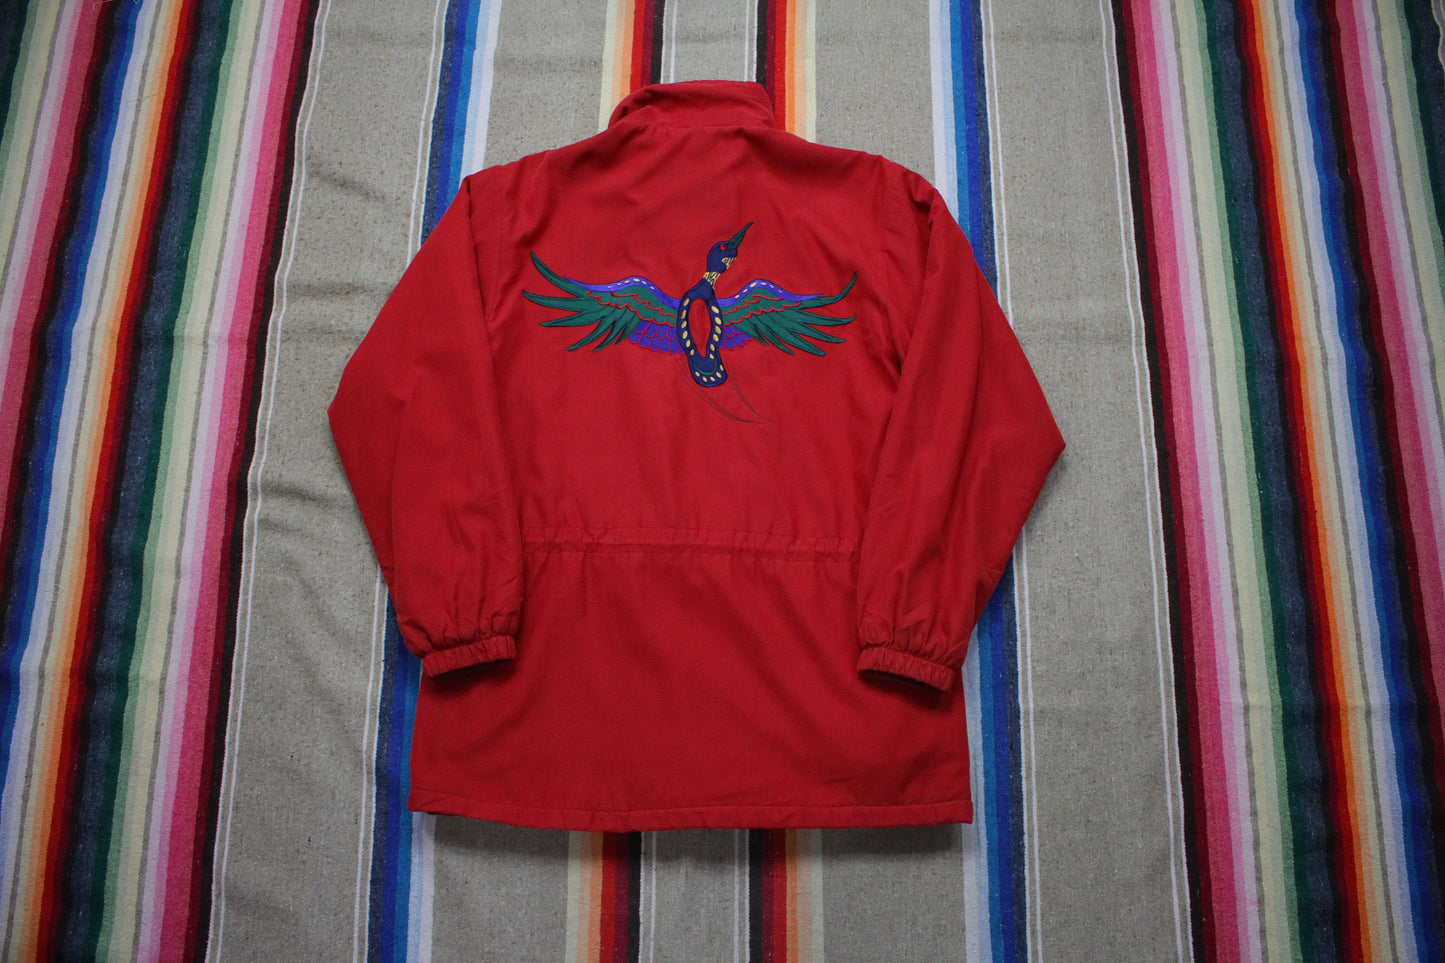 1980s/1990s Northern Sun Embroidered Loon Fleece Lined Jacket Made in Canada Size S/M